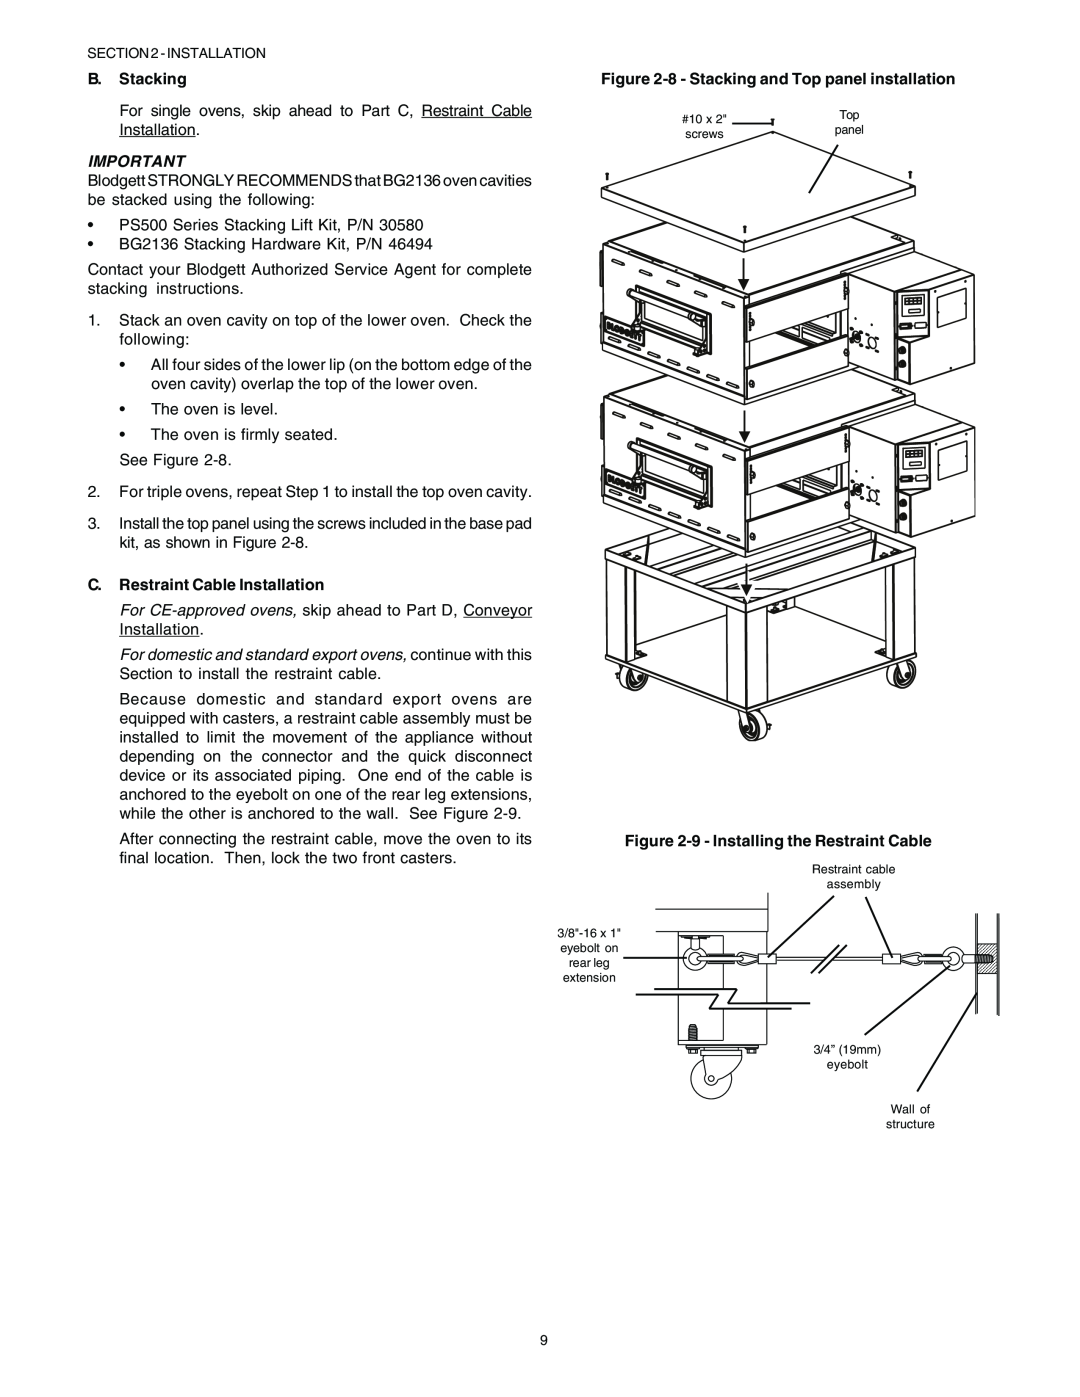 Blodgett BG2136 manual English, B. Stacking, C. Restraint Cable Installation, 8 - Stacking and Top panel installation 